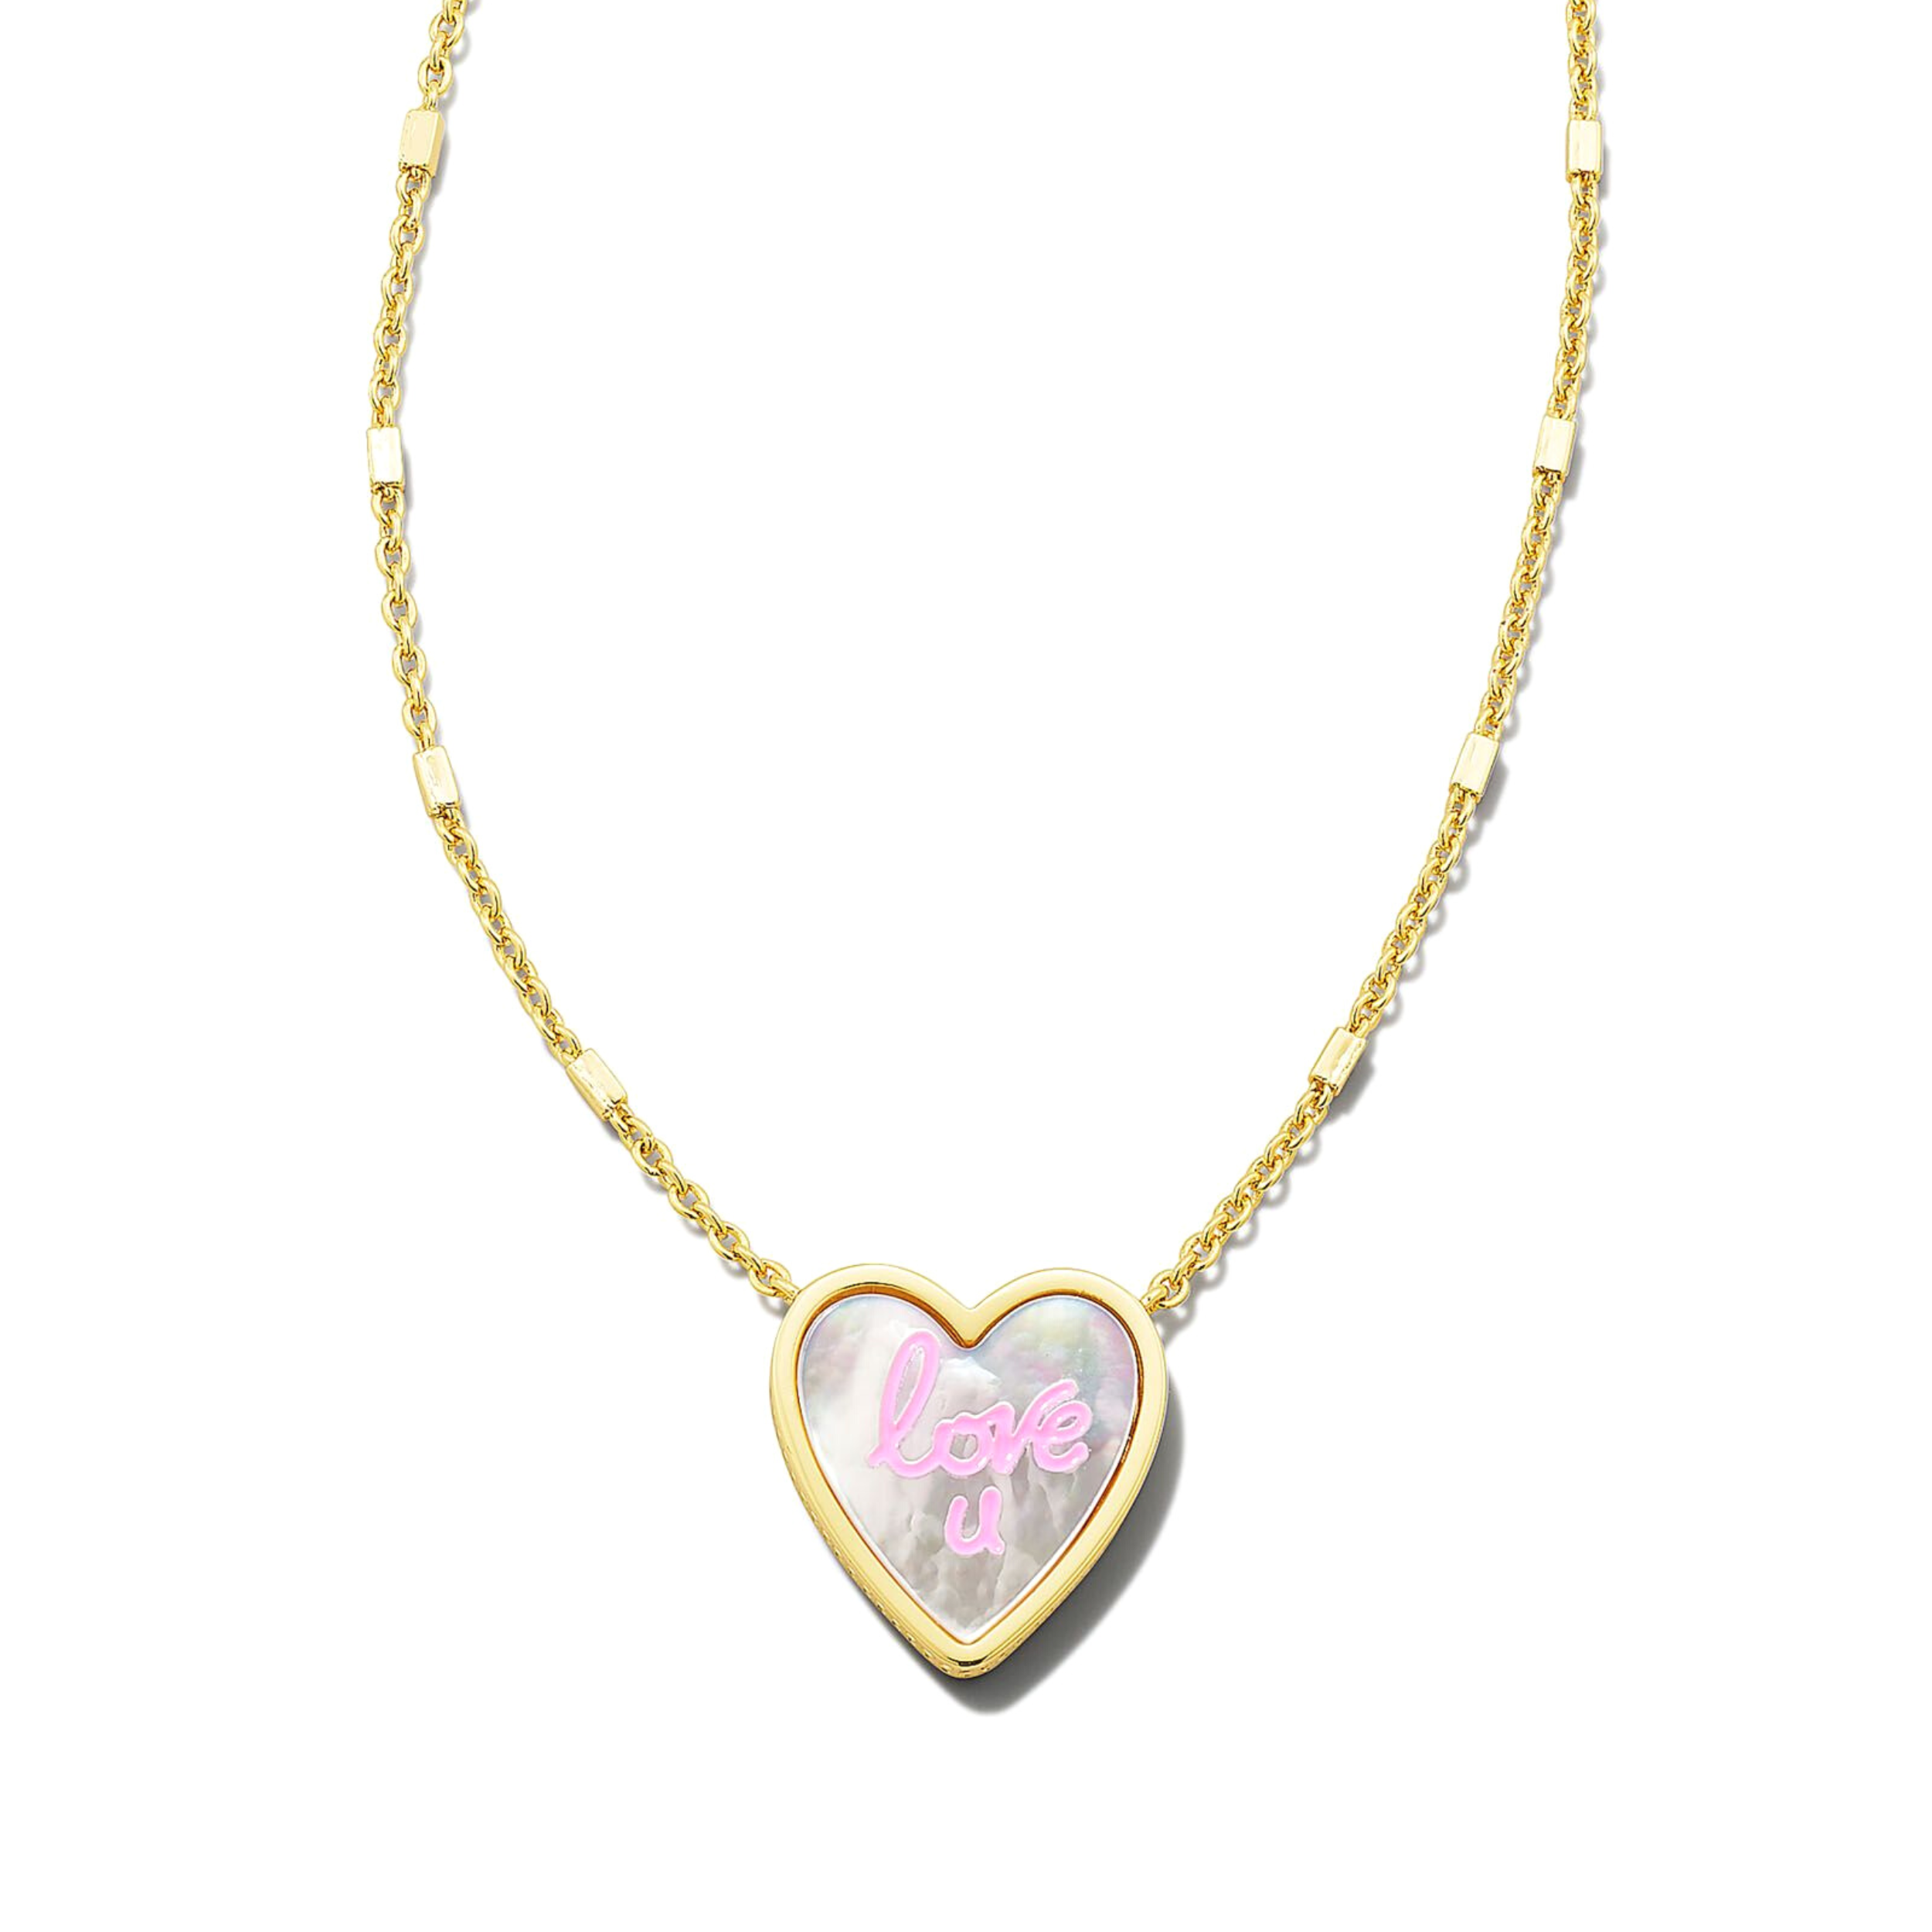 Kendra Scott | Love U Heart Gold Pendant Necklace in Ivory Mother-of-Pearl - Giddy Up Glamour Boutique